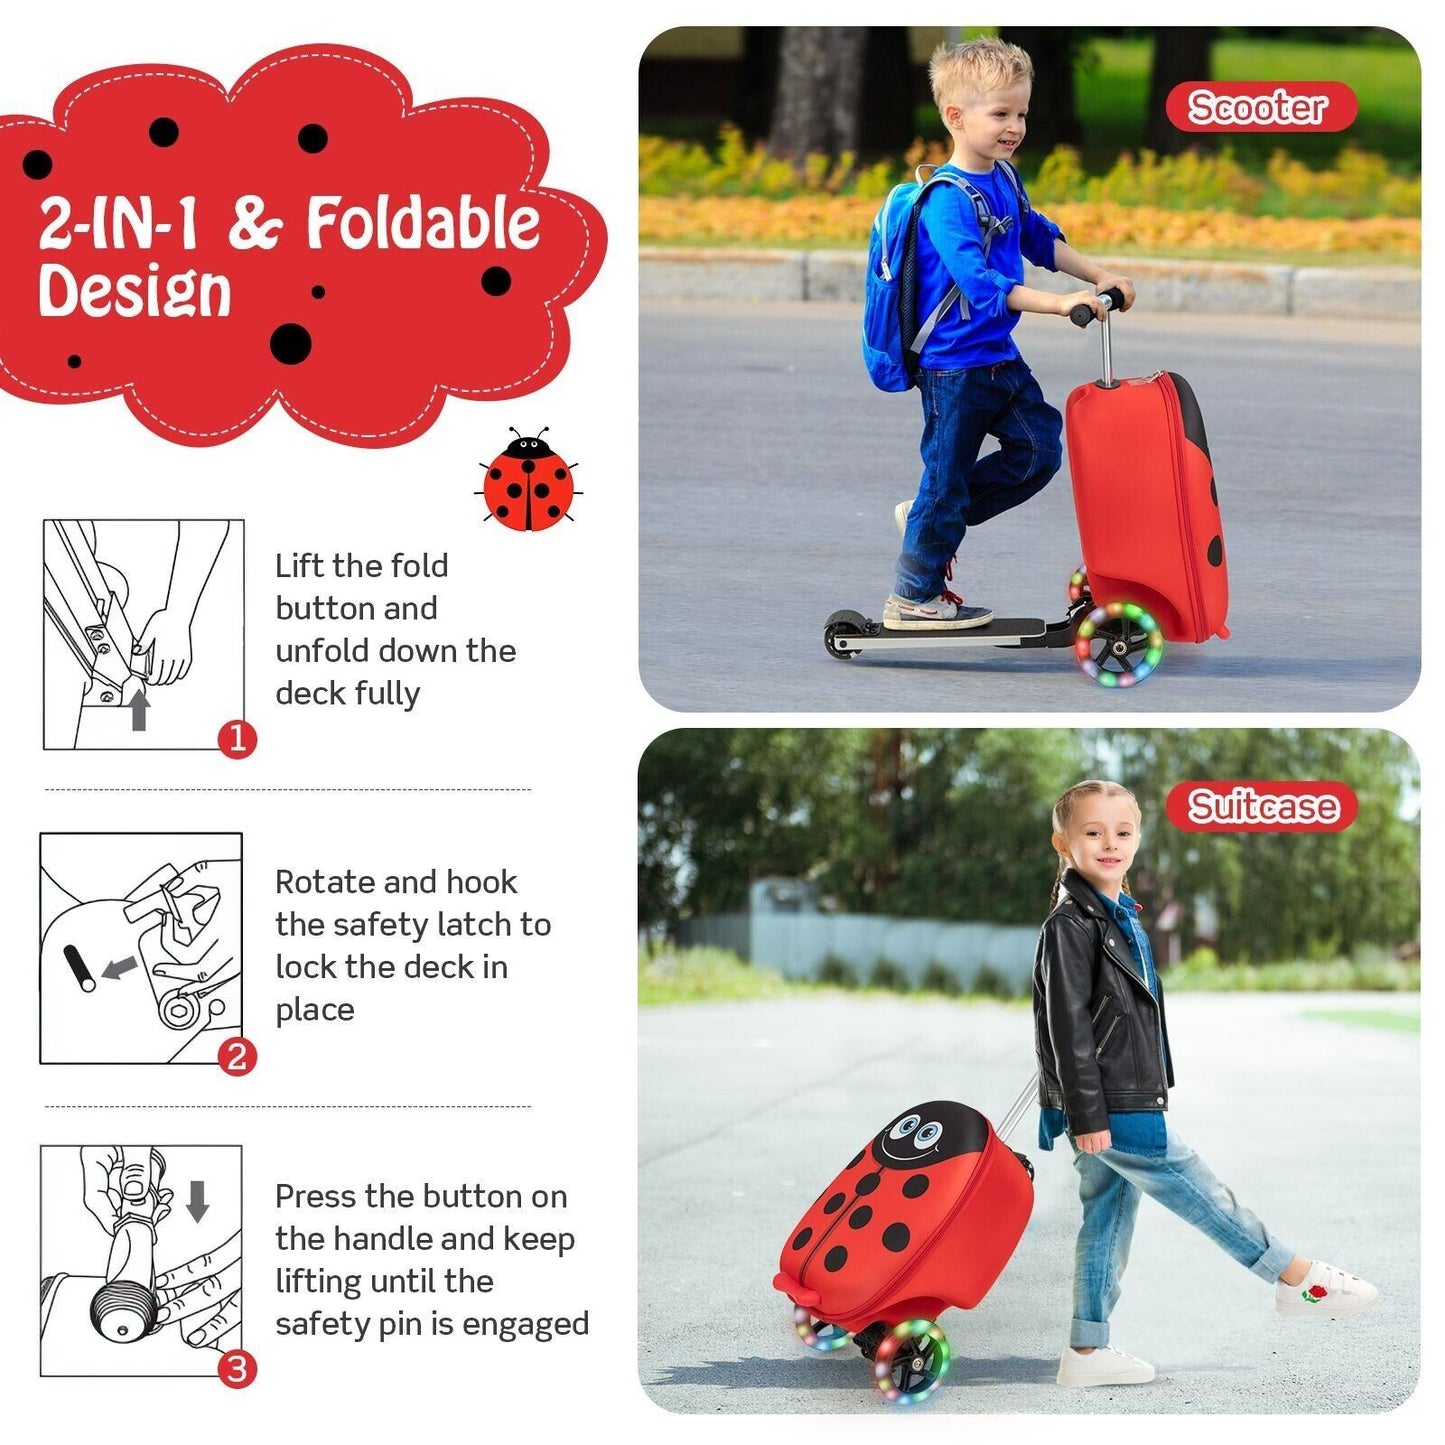 2-in-1 Ride On Scooter Suitcase